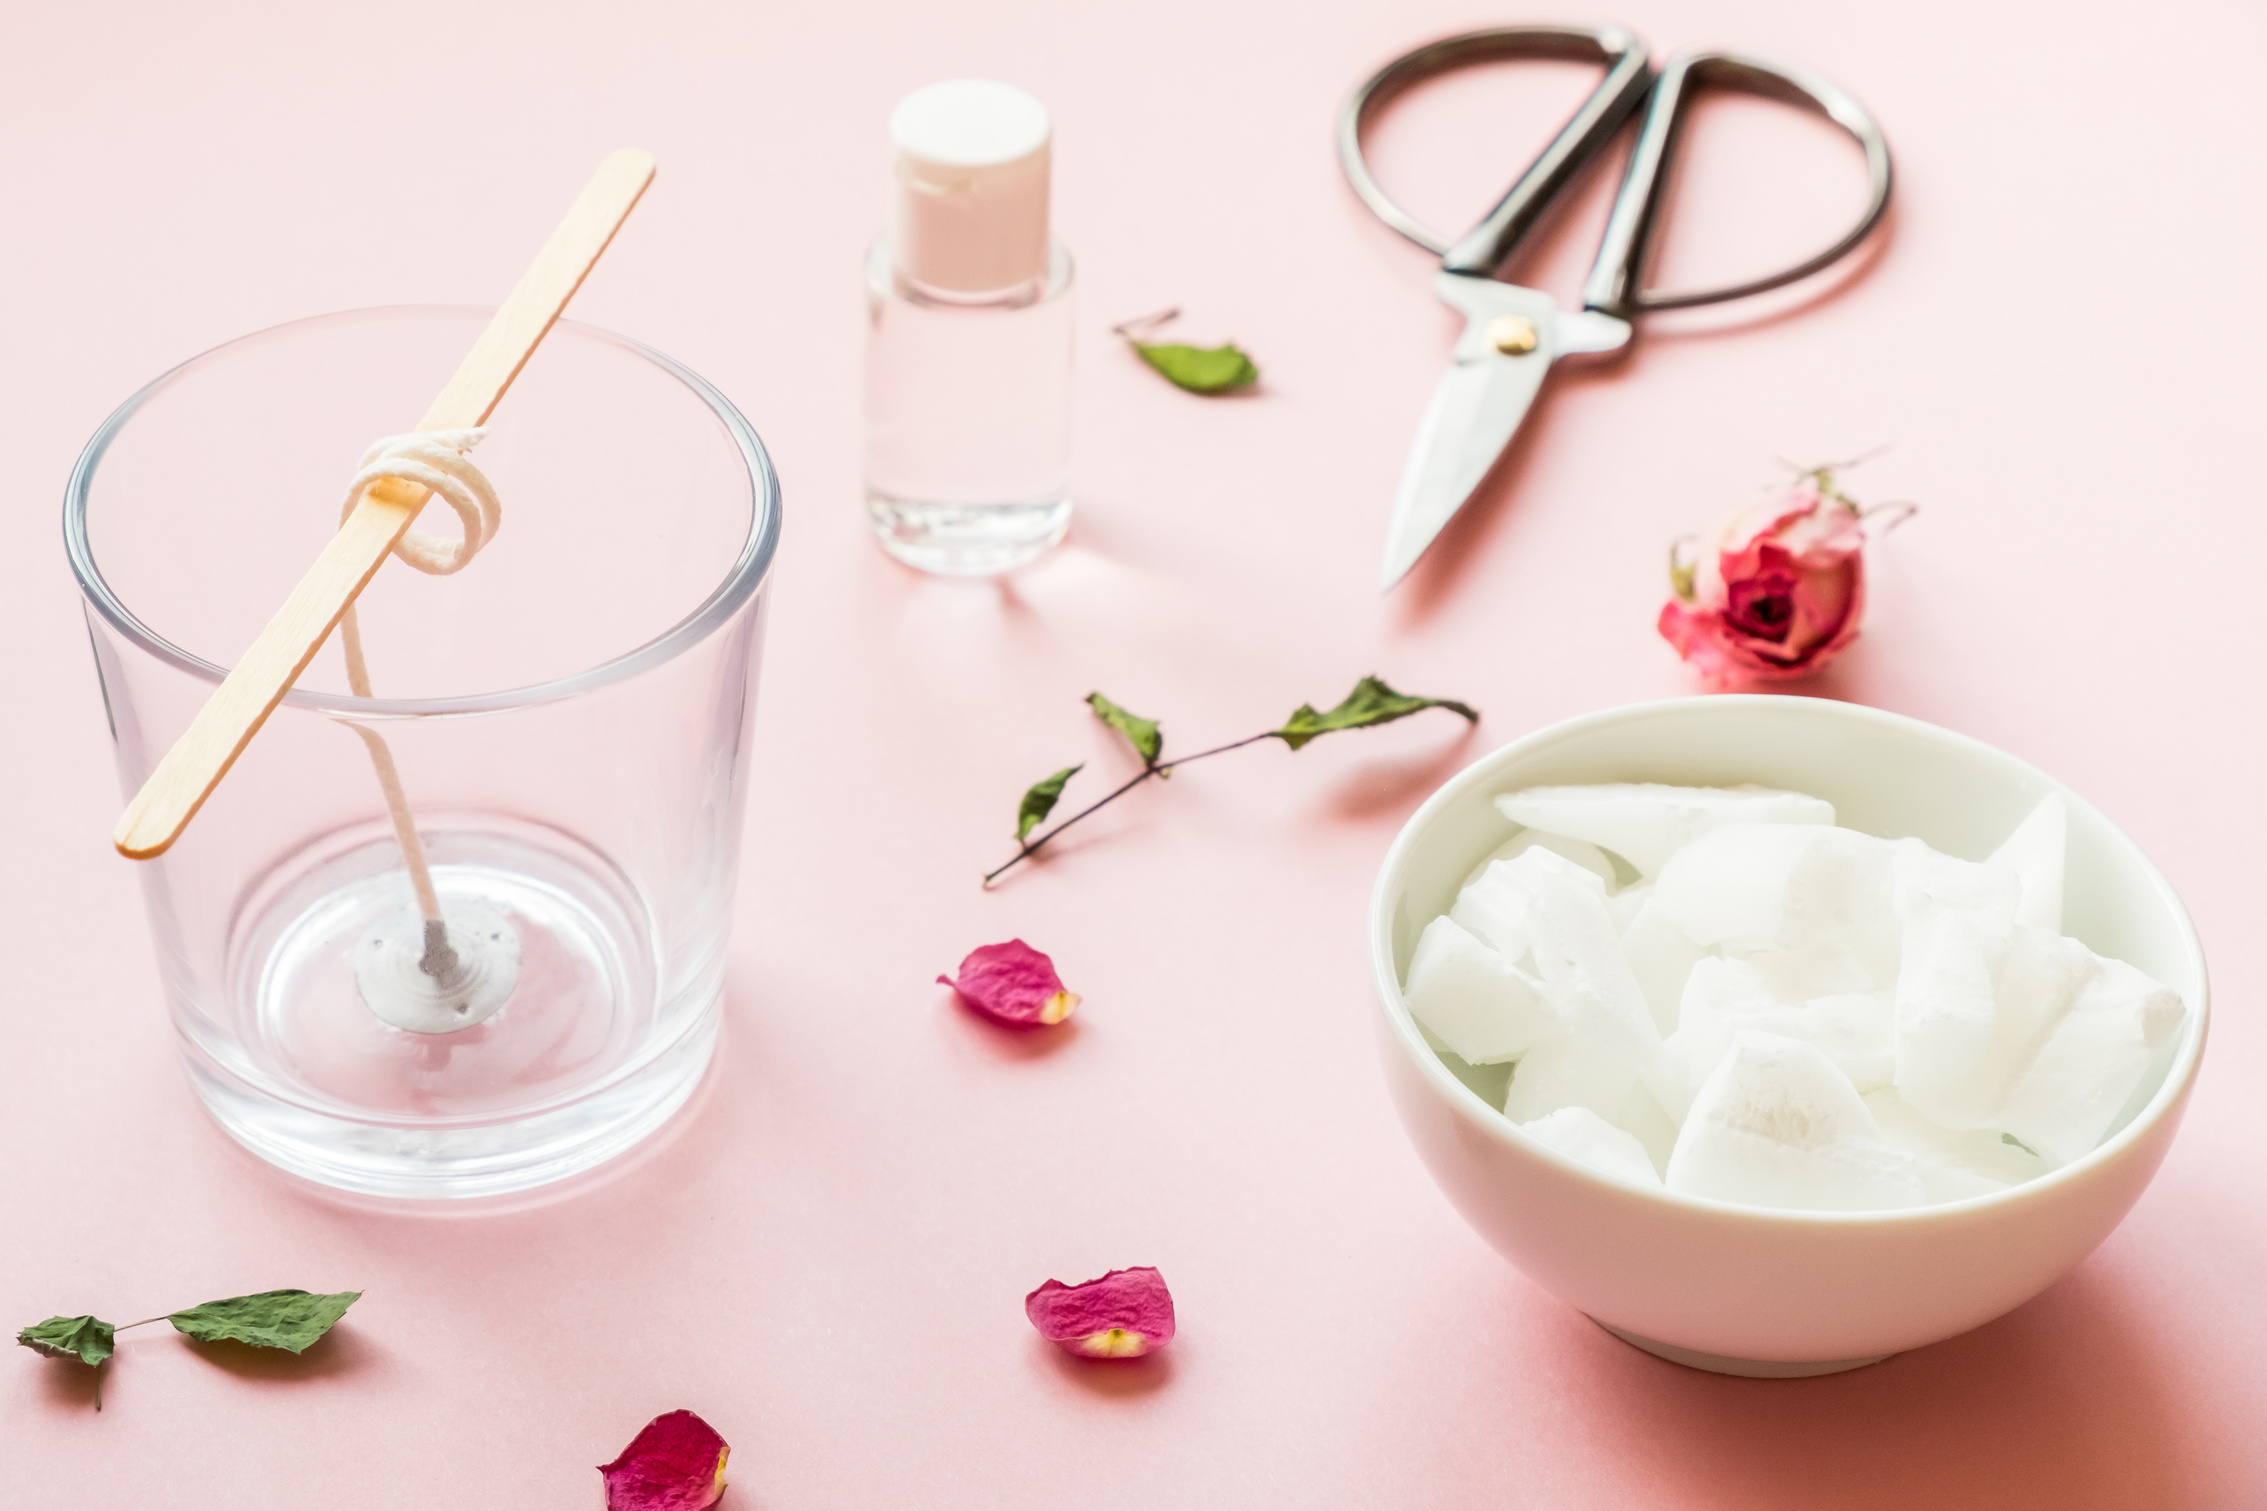 DIY concept. Wax, wick, dry roses - ingredients for making handmade candles on a pink background.